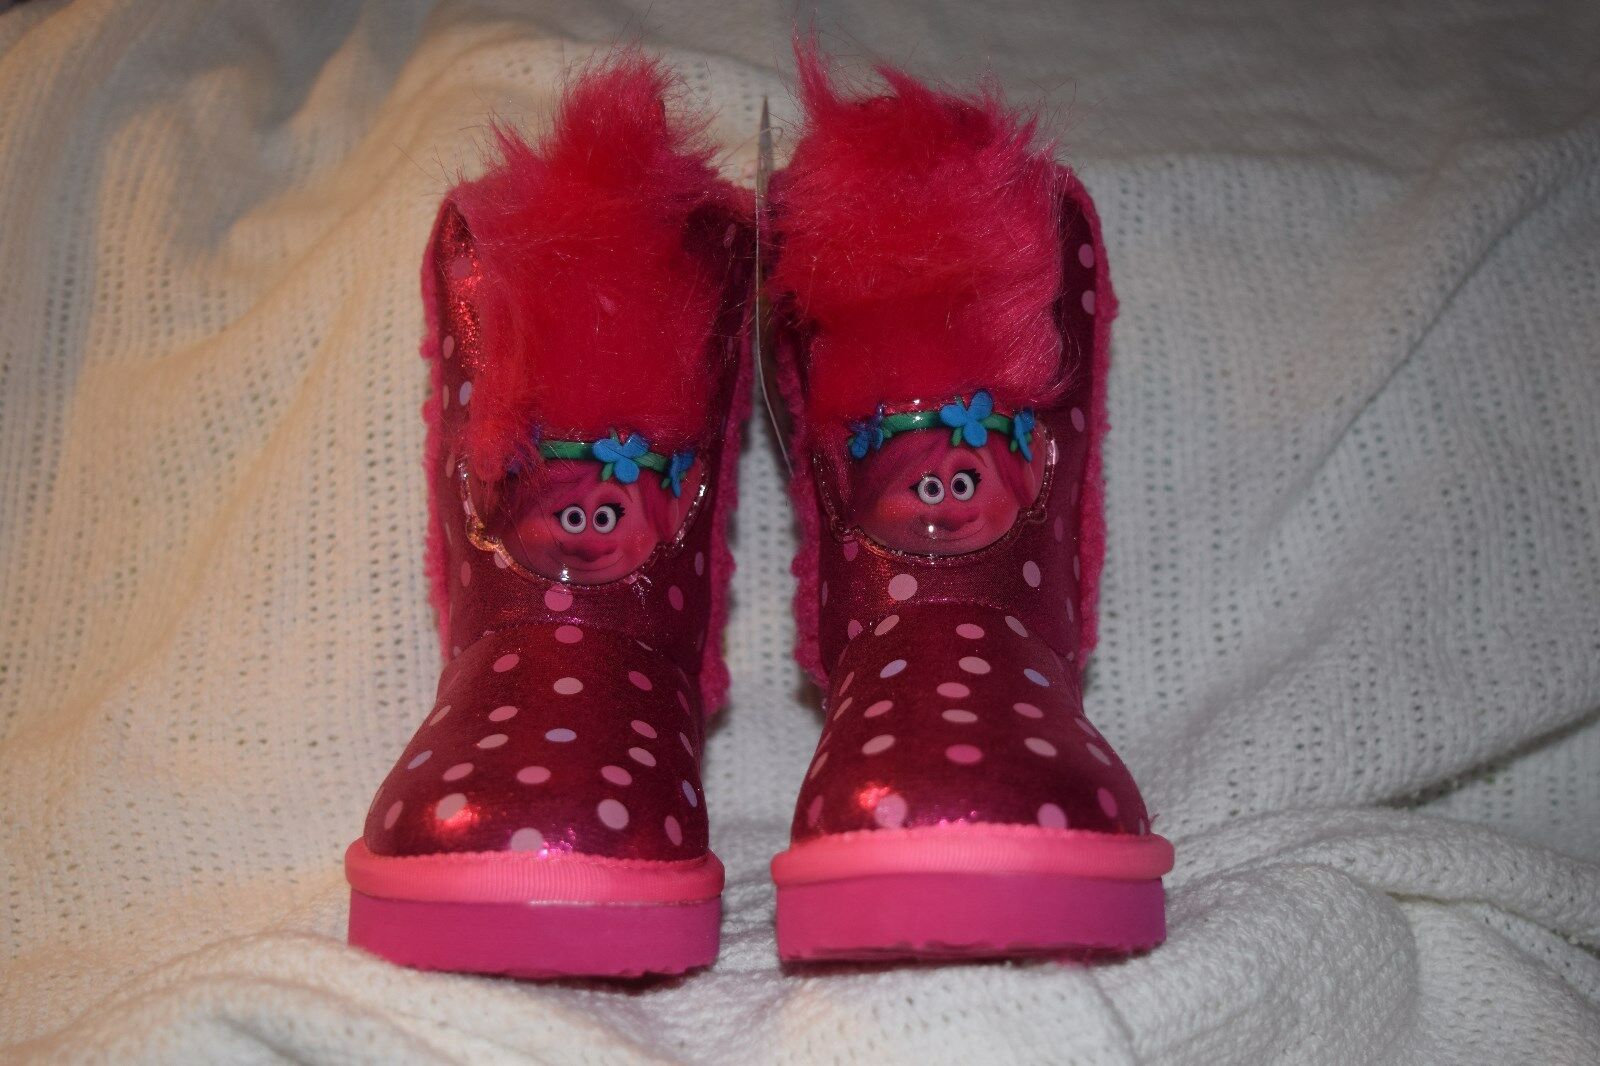 New in box DreamWorks Pink Trolls Poppy Plush Toddler Boots Size 7